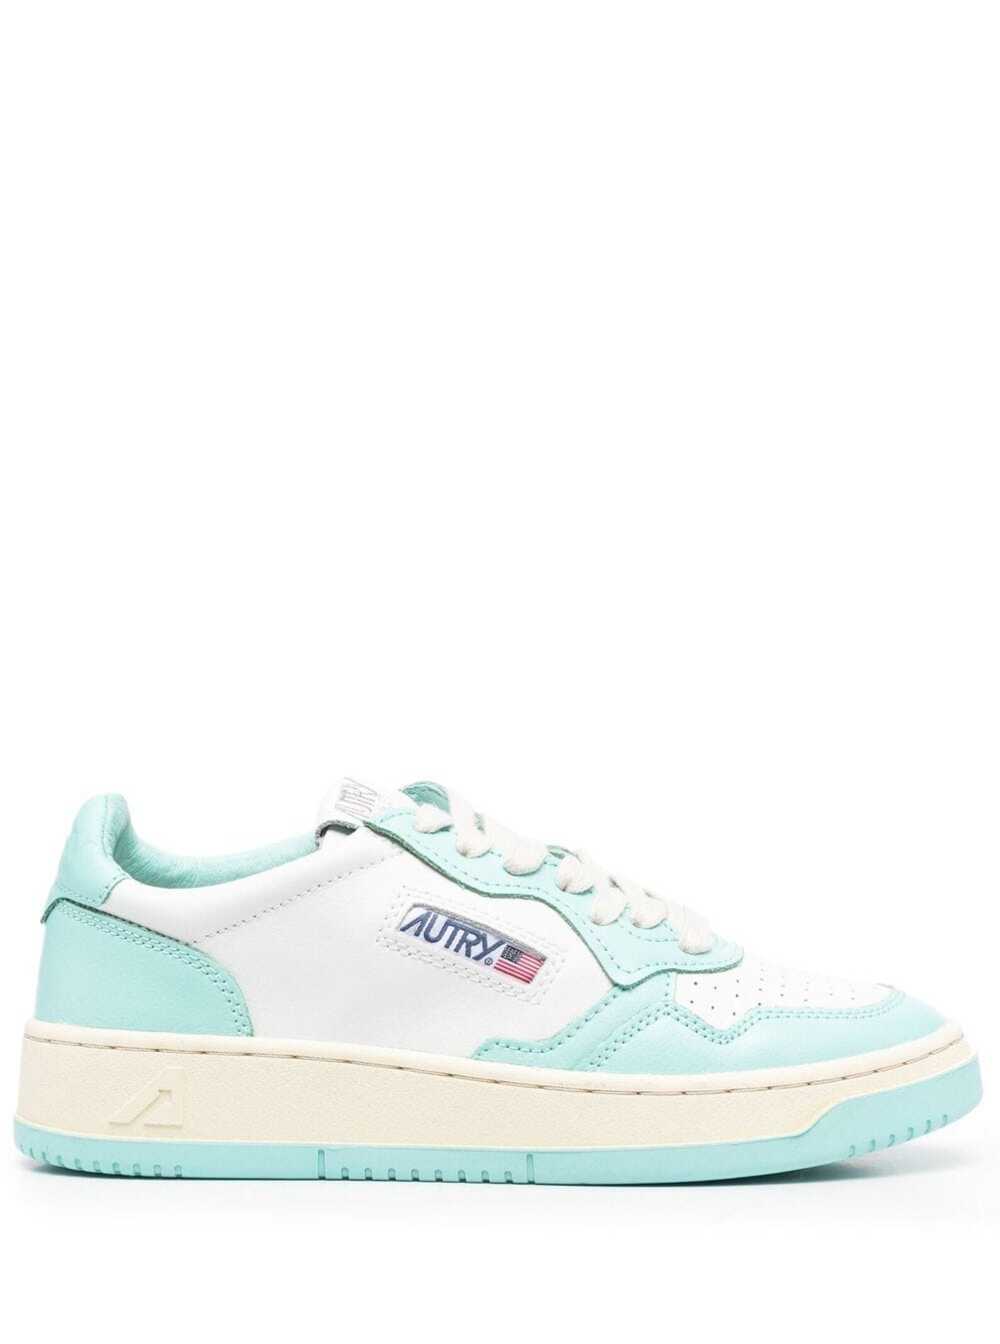 Autry medalist Low White And Light Blue Panelled Sneakers In Leather Woman